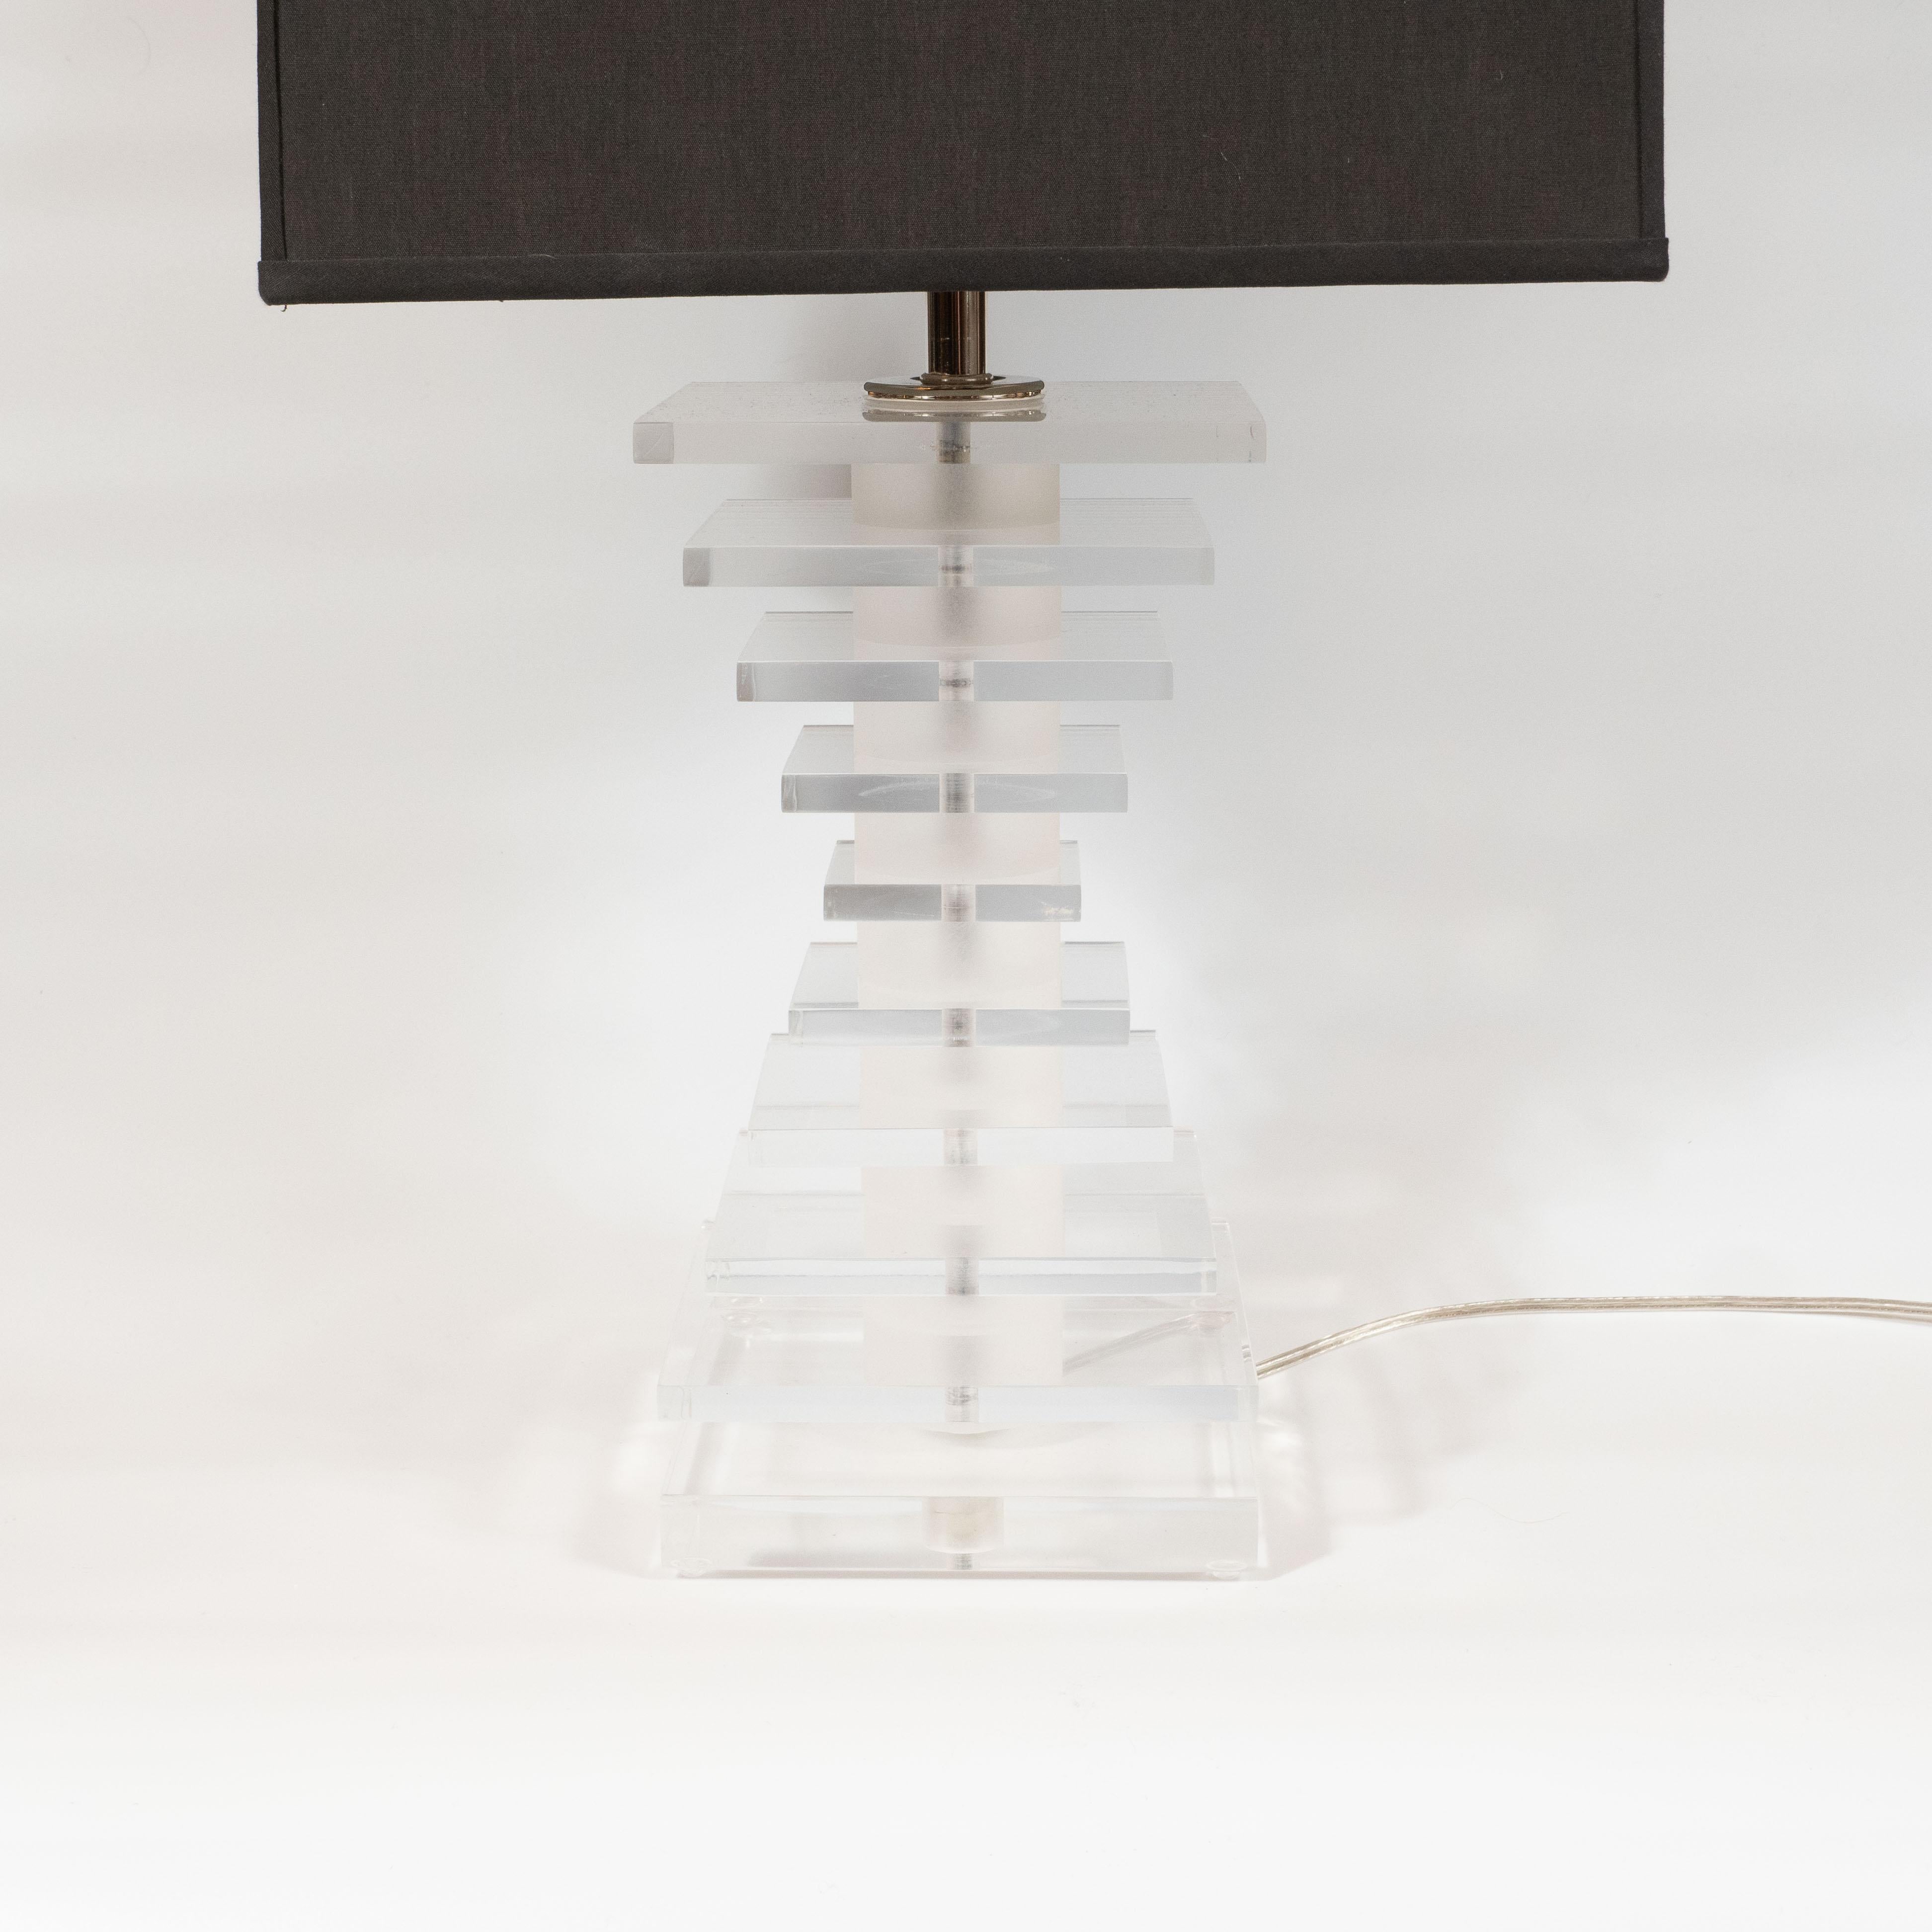 This chic and sophisticated Lucite skyscraper style table lamp was realized in the United States circa 1970. Translucent stacked Lucite panels- alternating with frosted bands in the same material- are stacked to create an hour glass form that is